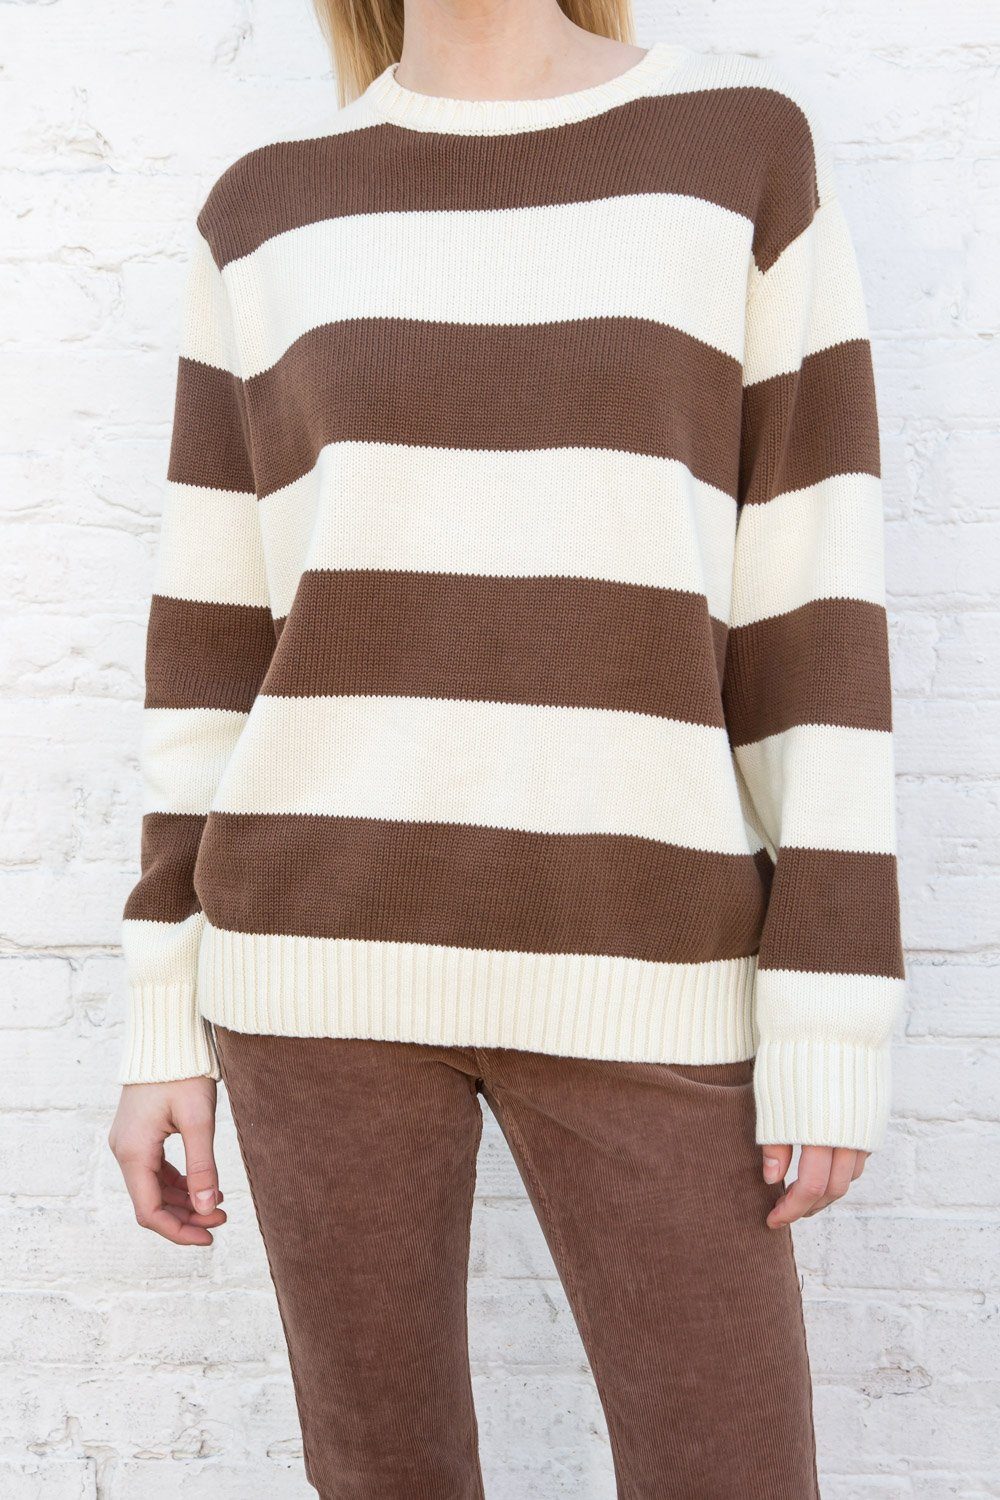 Brown Cream Stripes / Oversized Fit